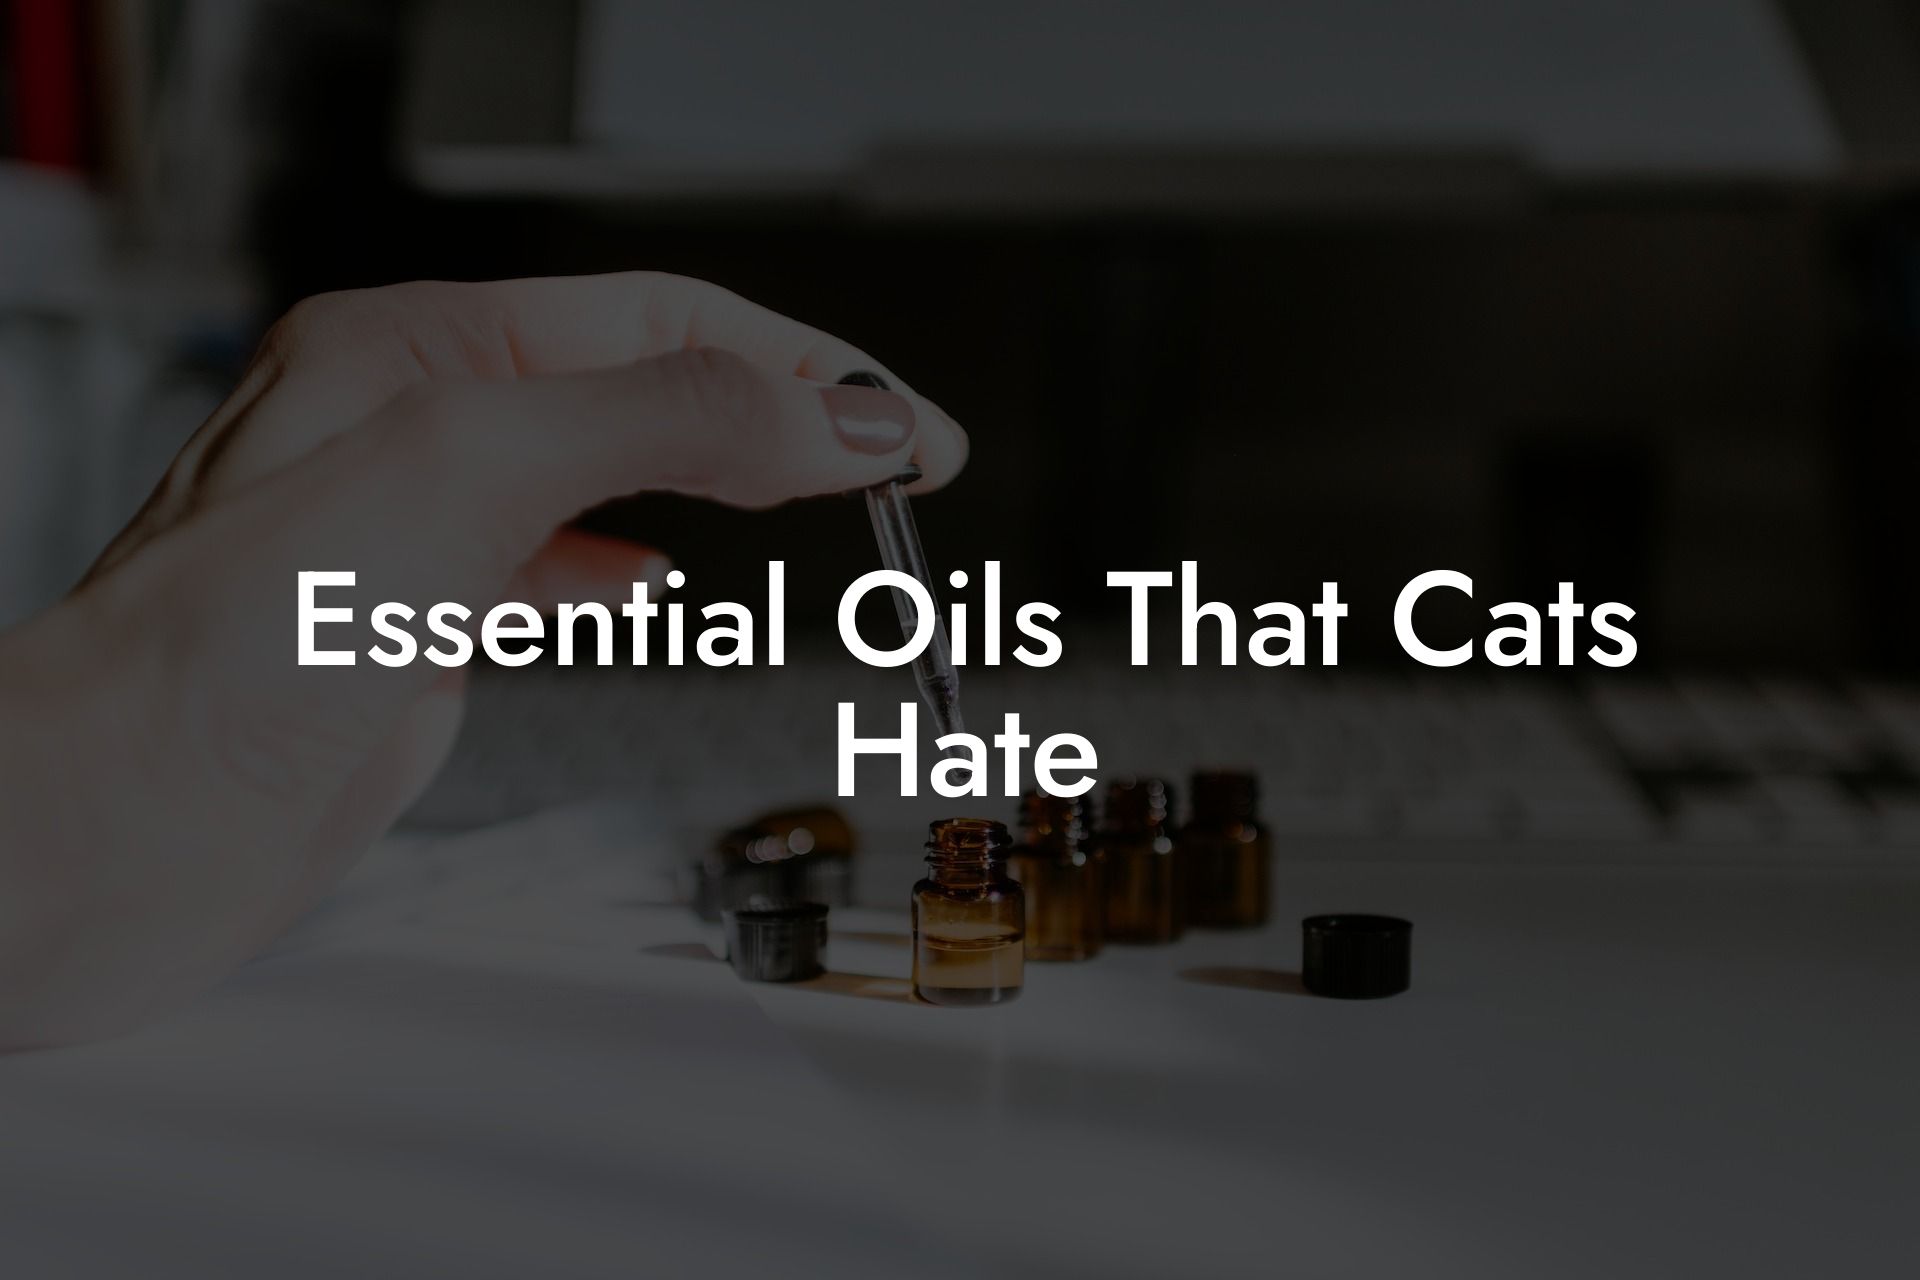 Essential Oils That Cats Hate